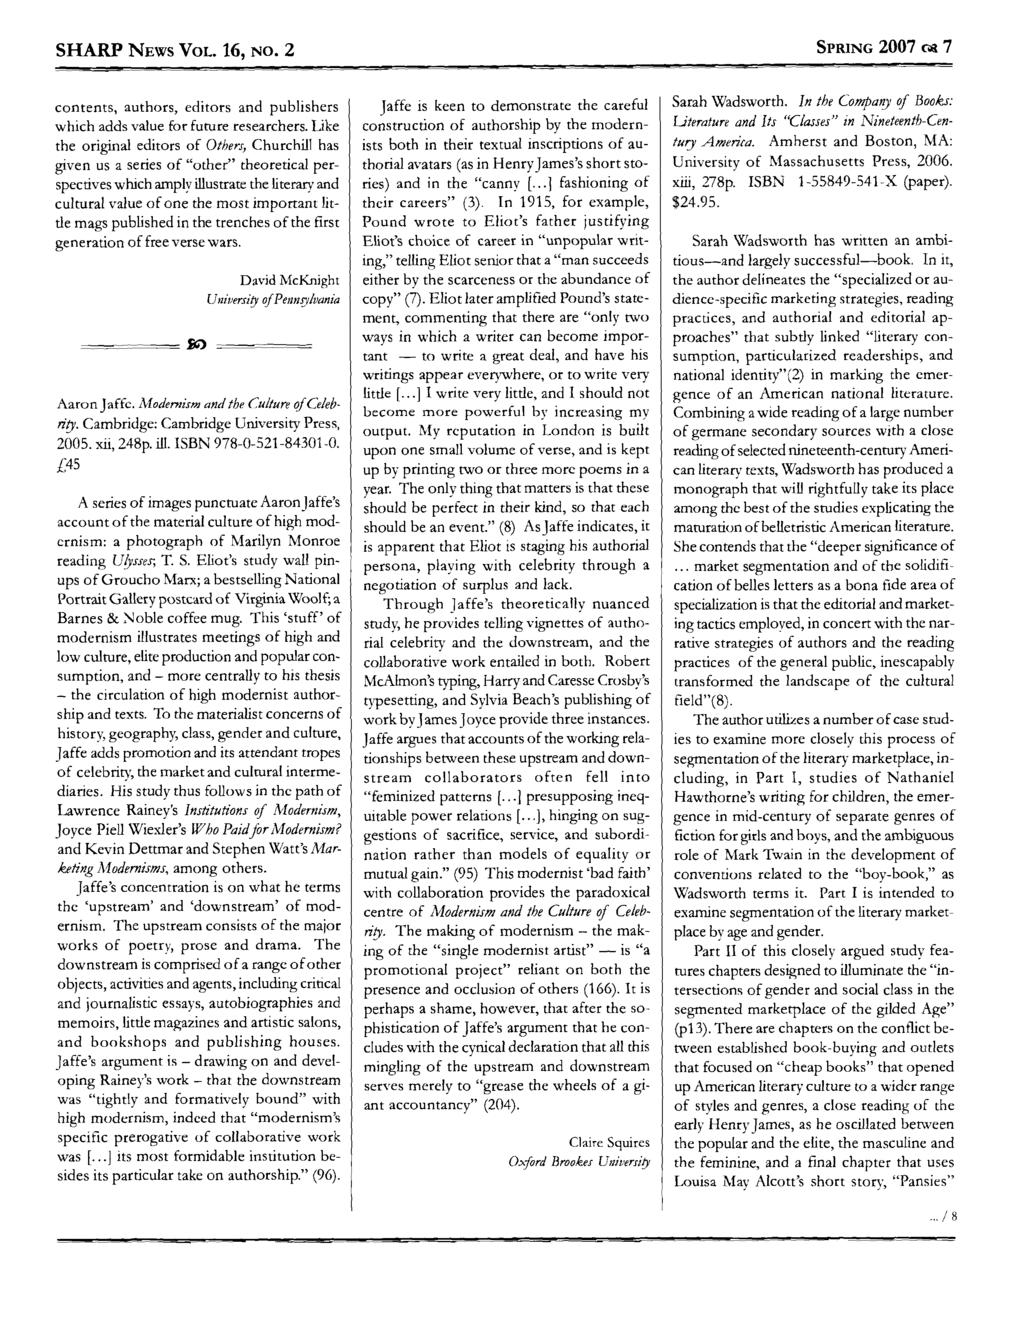 SHARP NEWS VOL. 16, NO. 2 et al.: Volume 16, Number 2 SPRING 2007 ca 7 contents, authors, editors and publishers which adds value for future researchers.